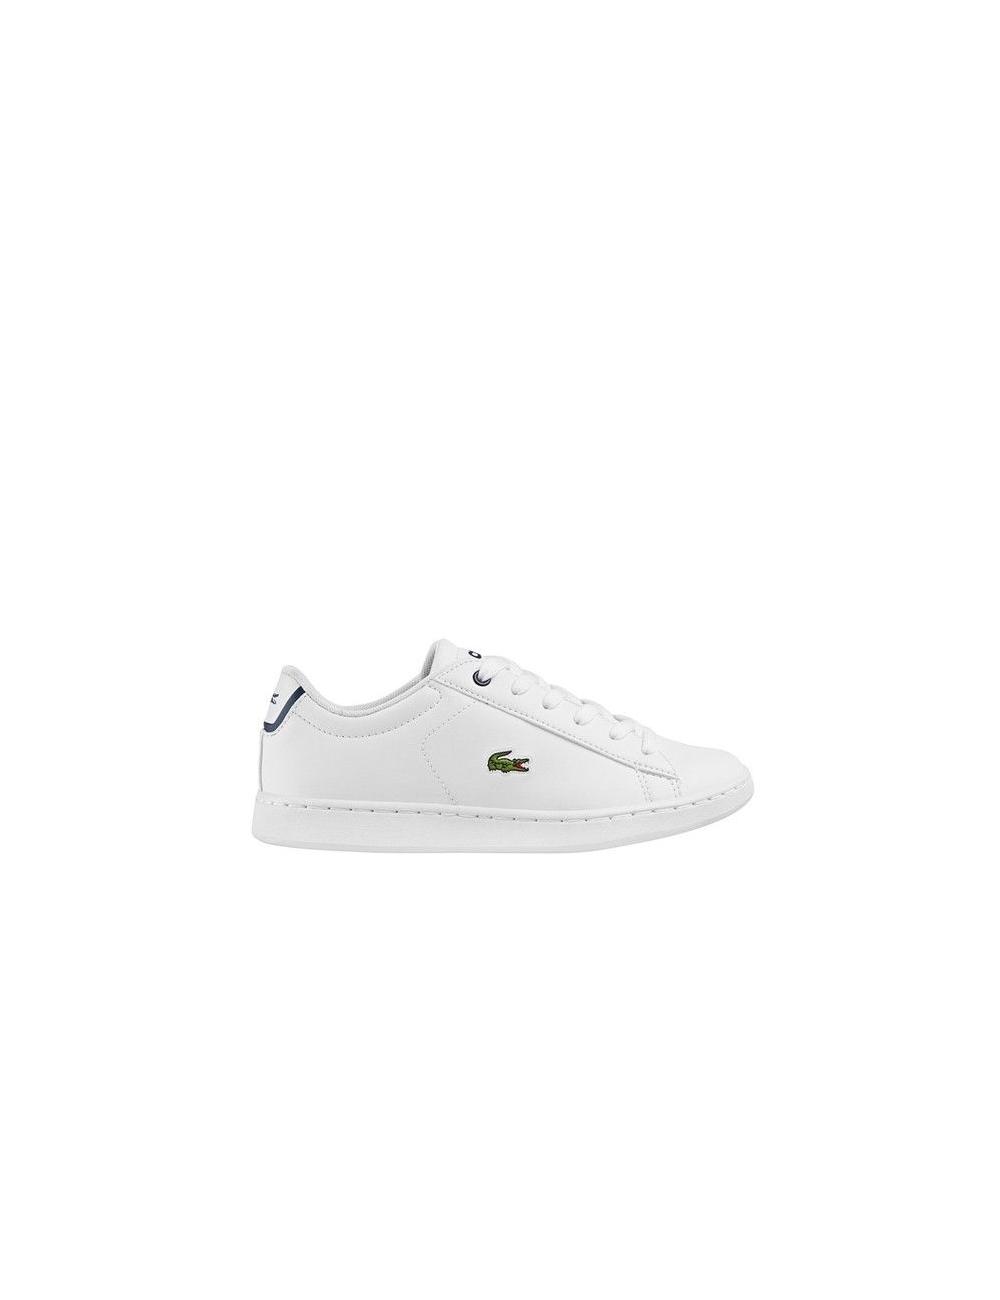 LACOSTE DEPORTIVO CARNABY MUJER